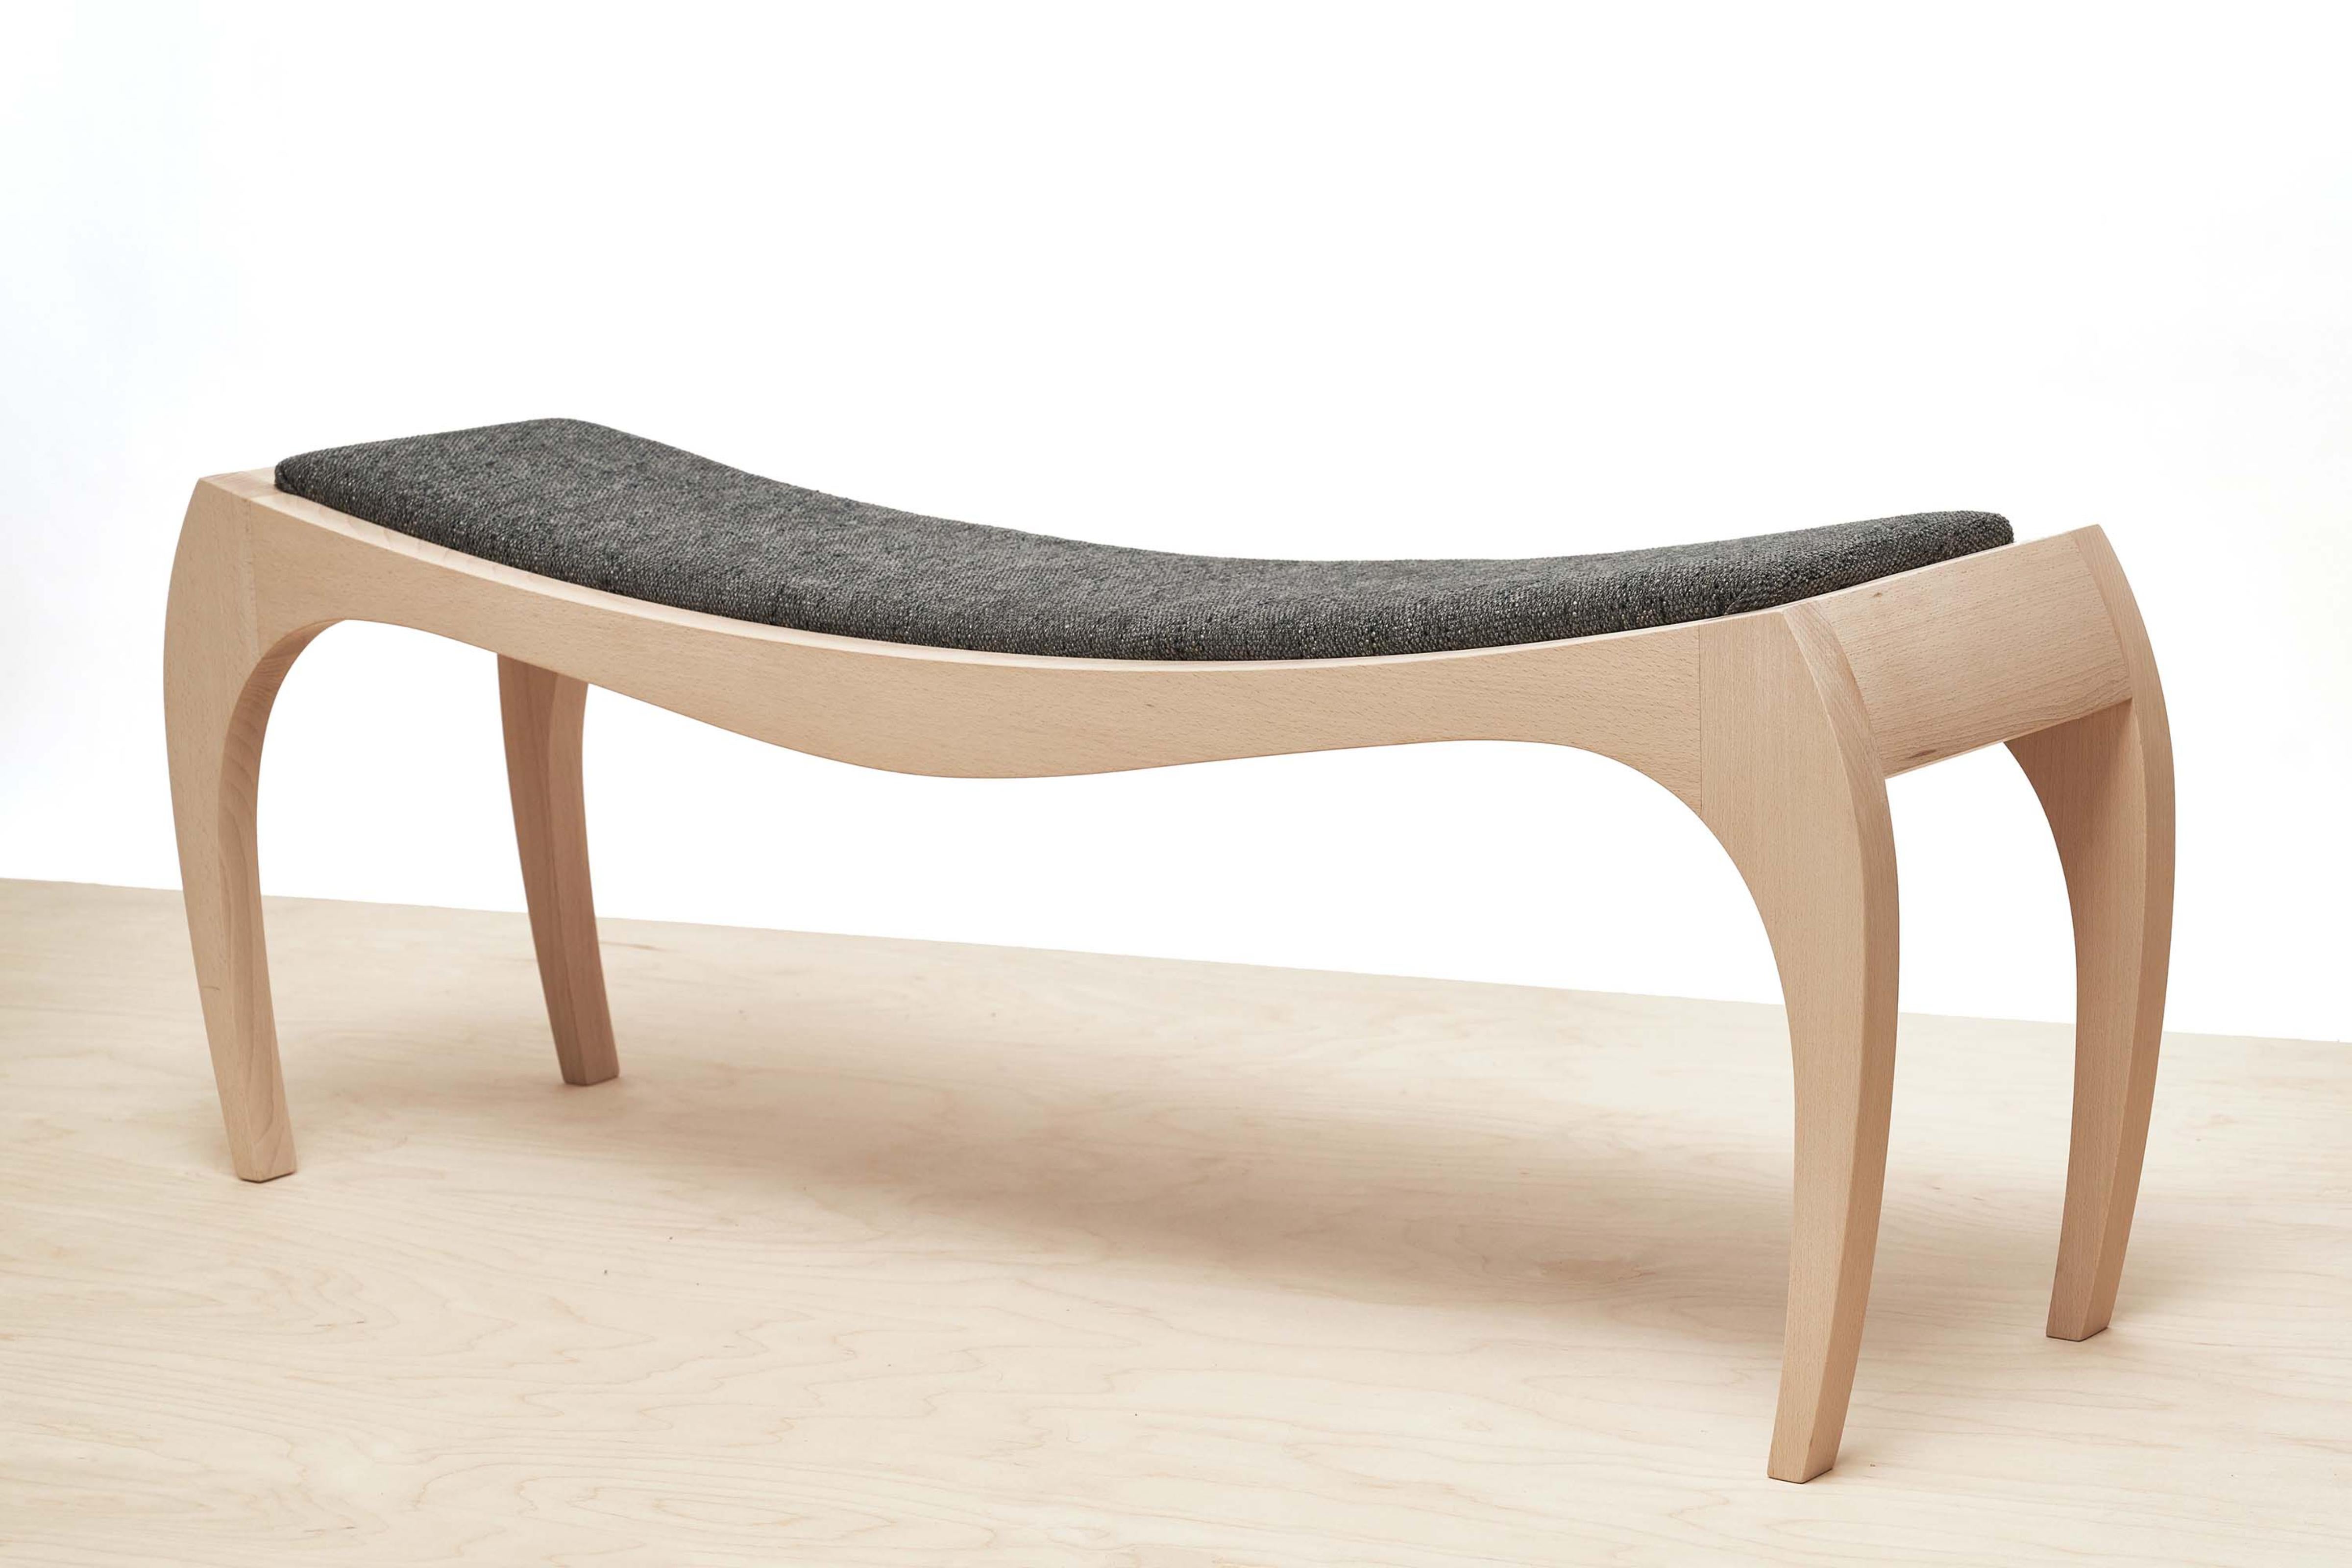 RUMBO Bench by Jean-Baptiste Van den Heede
Dimensions: L 118 x D 31 x H 42 cm
Materials: White Beech, Textile.
Also Available: Other textiles available,

The upholstered RUMBO version proposes a stool with quality fabrics to your liking. It can